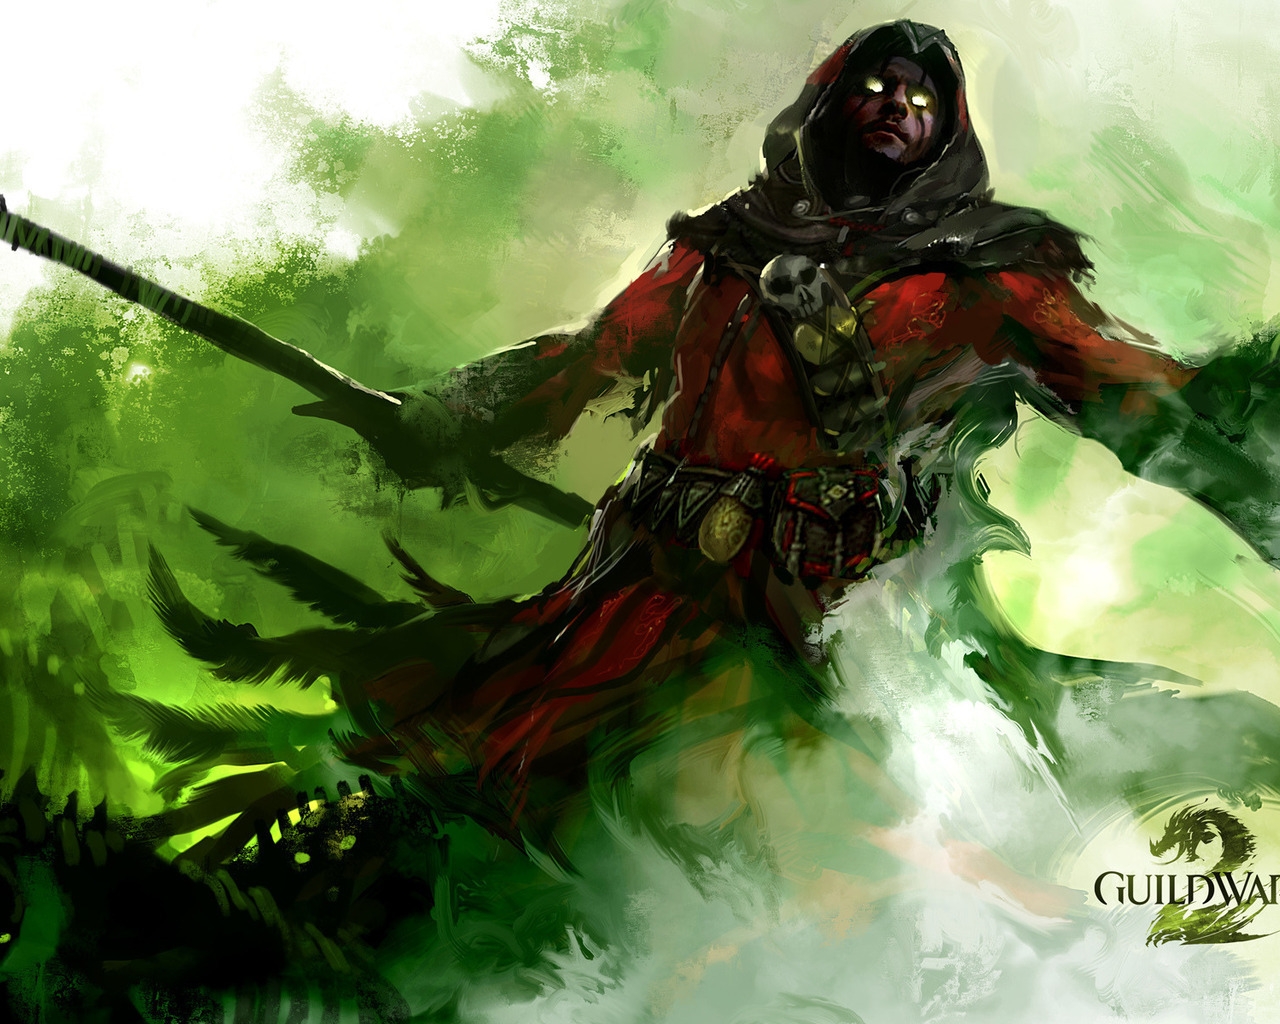 Great Guild Wars 2 for 1280 x 1024 resolution